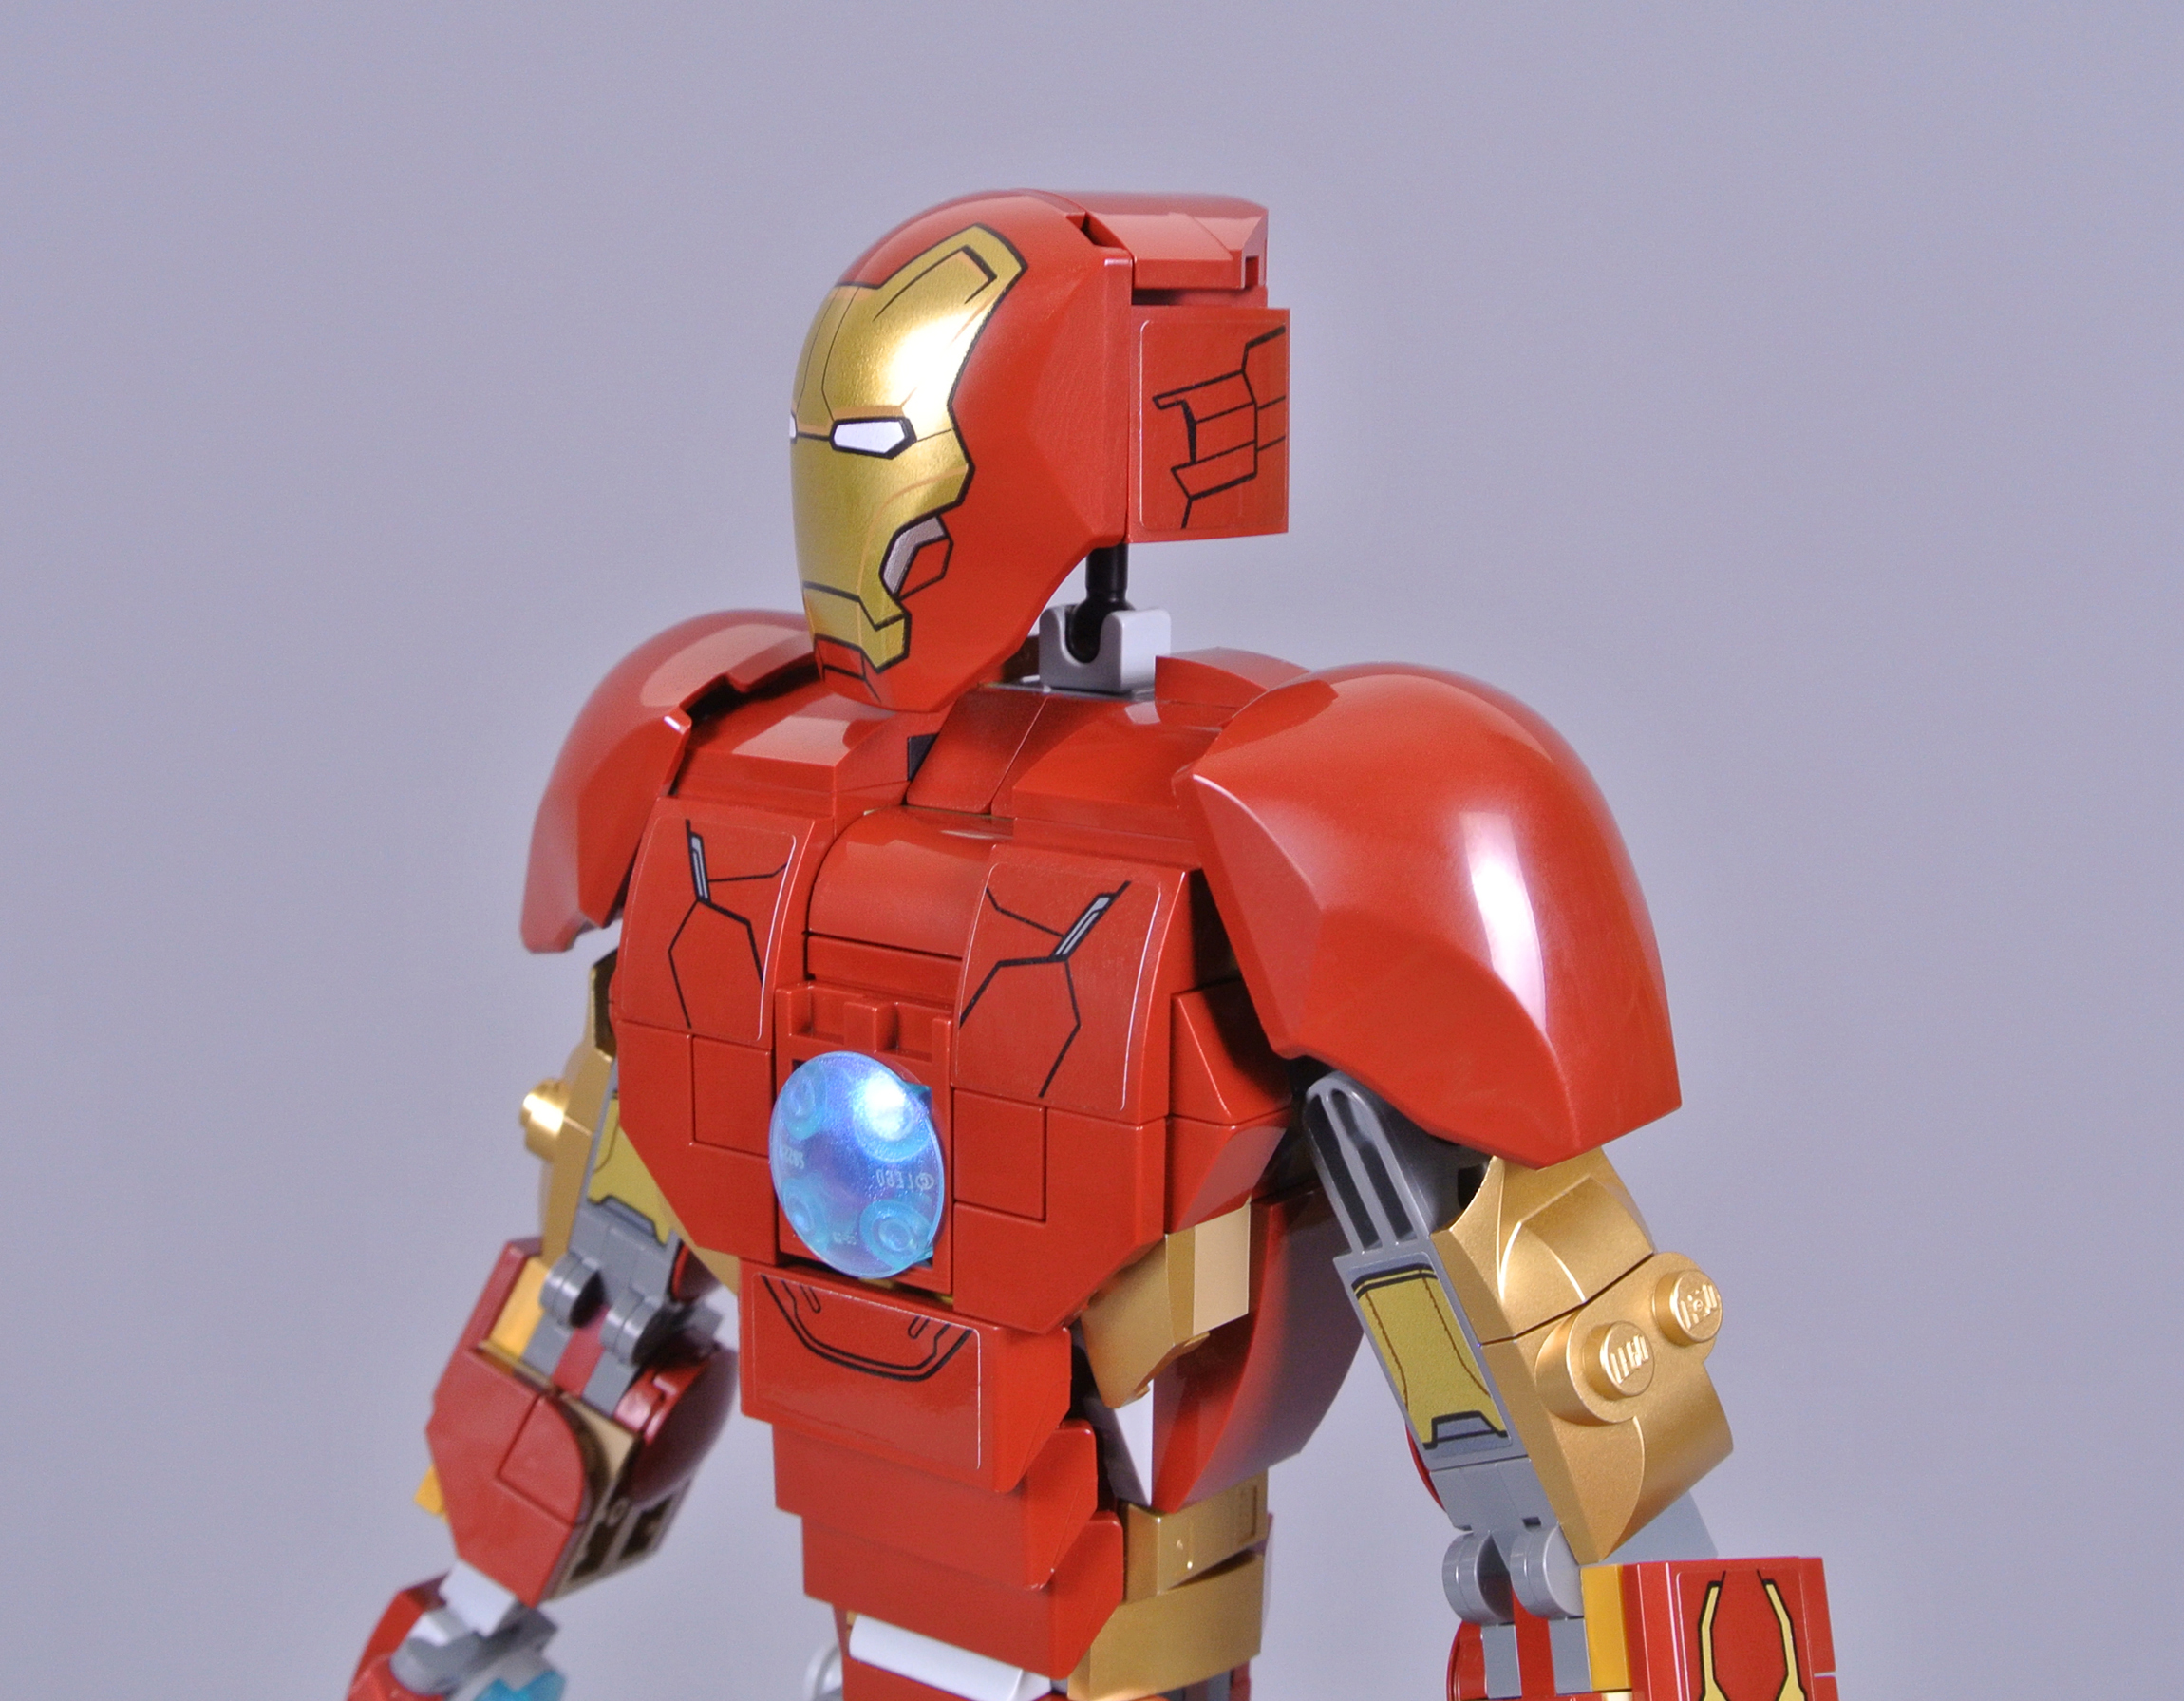 LEGO Marvel Super Heroes 76206 Iron Man Figure [Review] - The